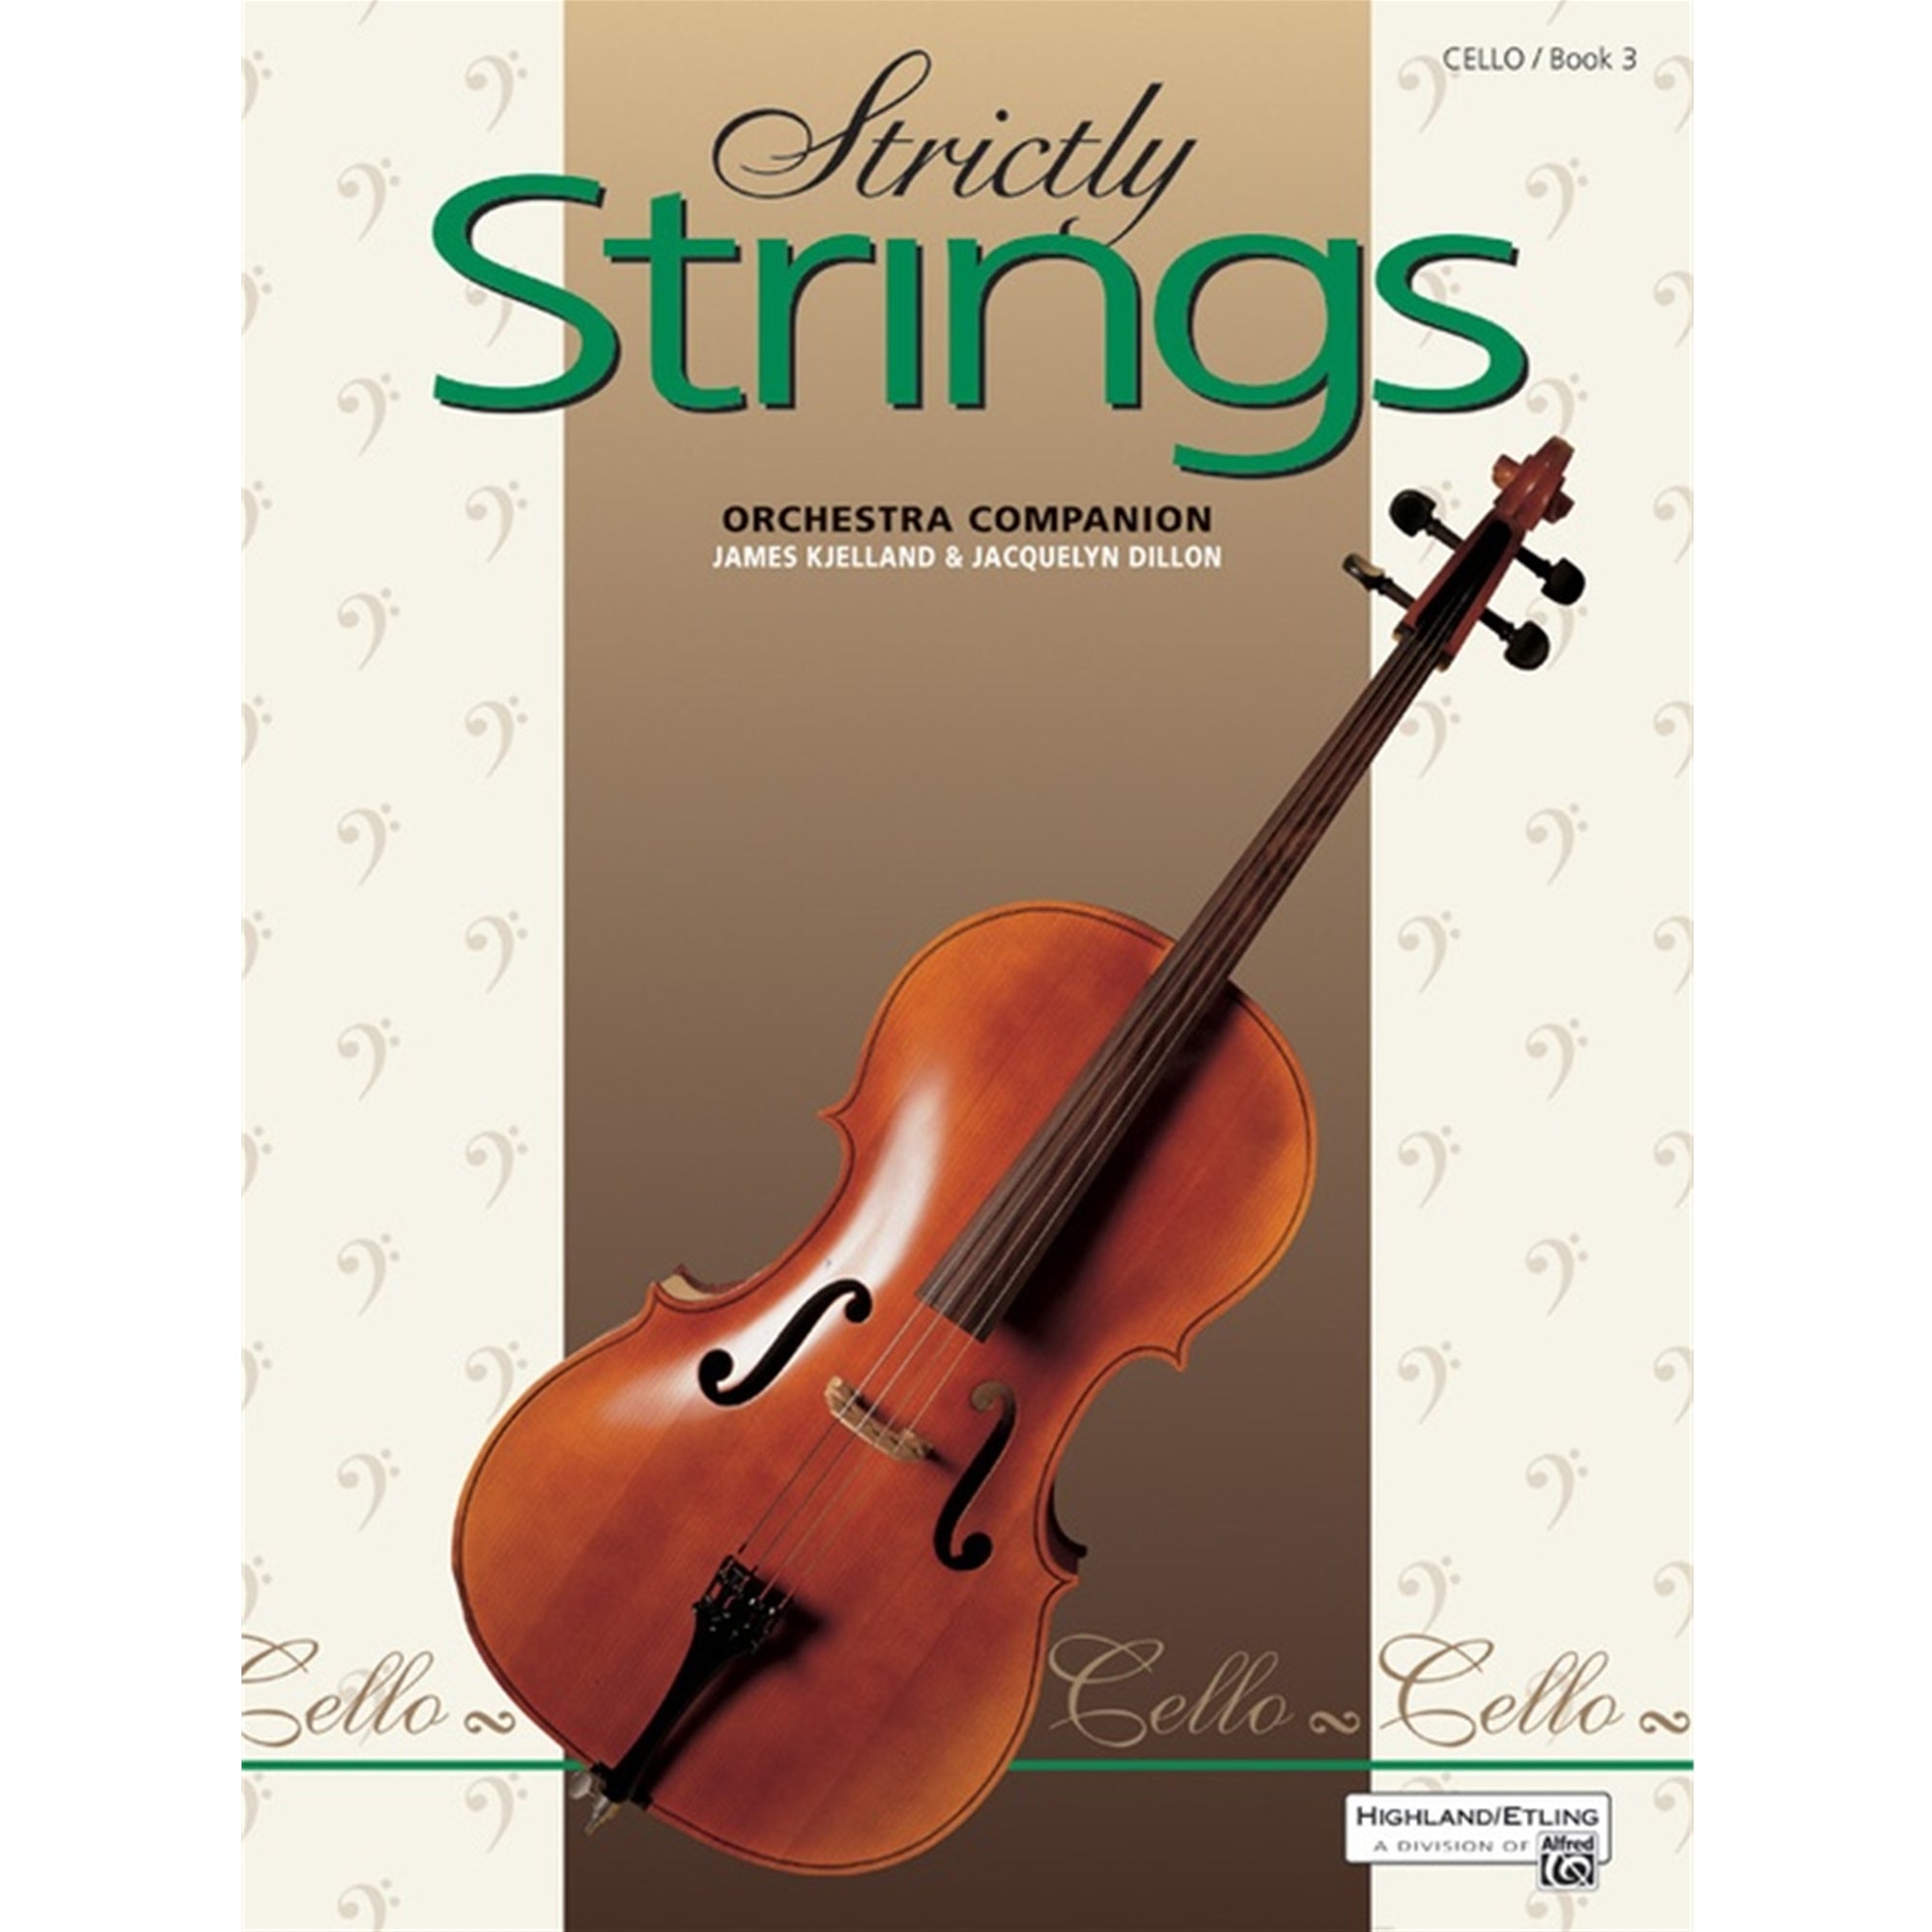 ALFRED 16861 Strictly Strings Cello Book 3